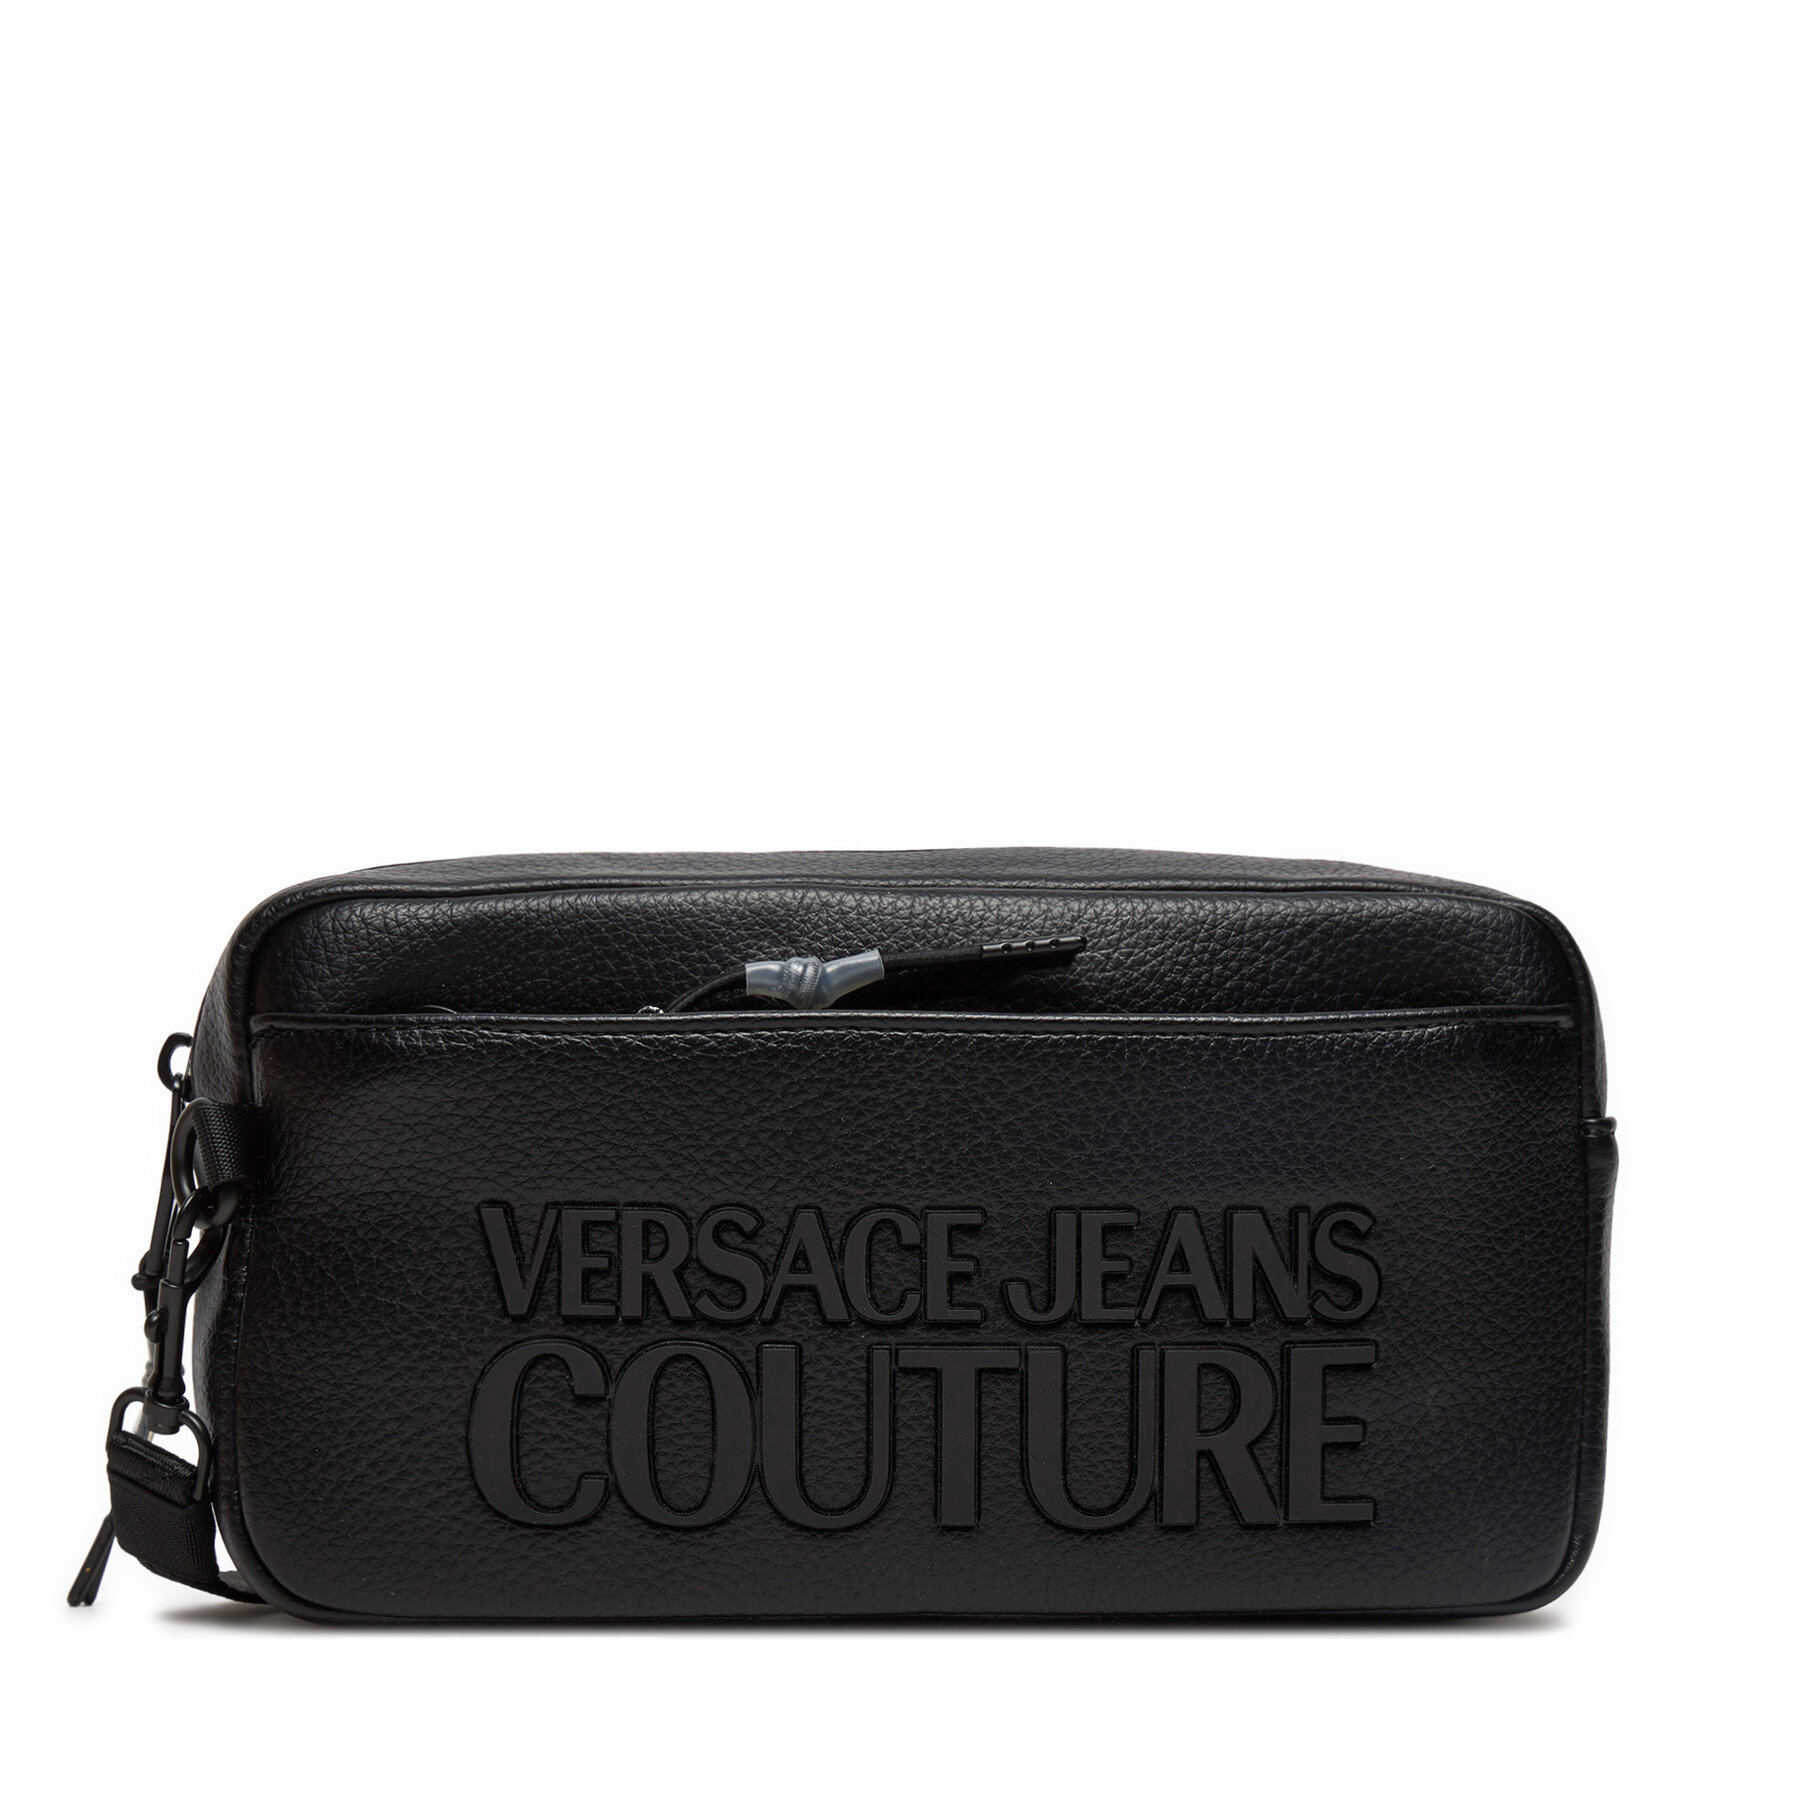 Crossover torbica Versace Jeans Couture 75YA4B7A Crna